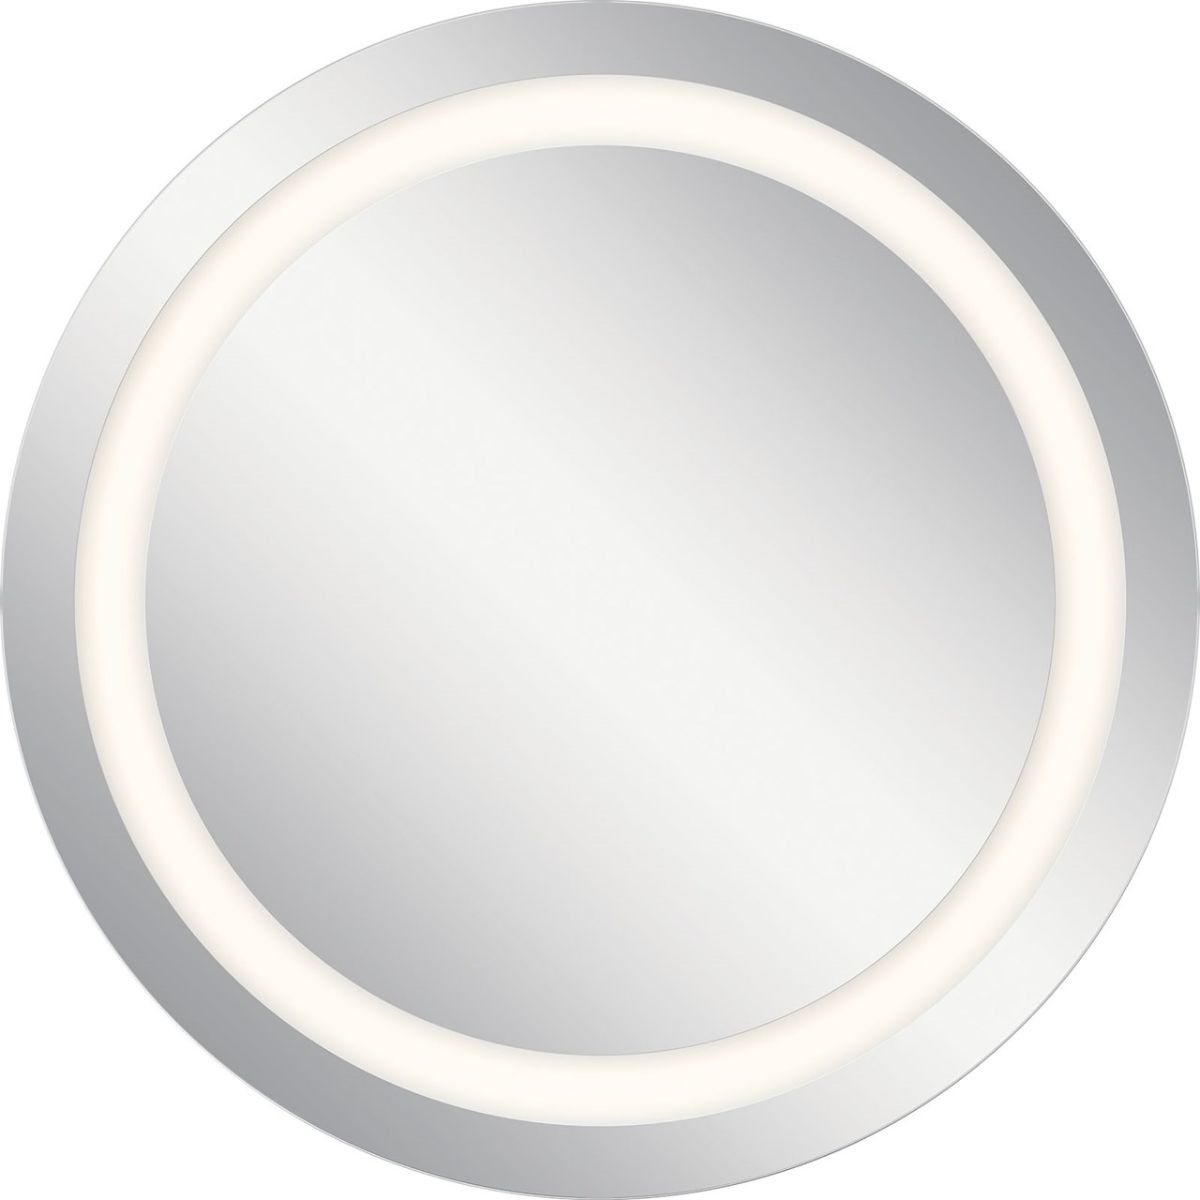 34 In. LED Mirror Silver Finish